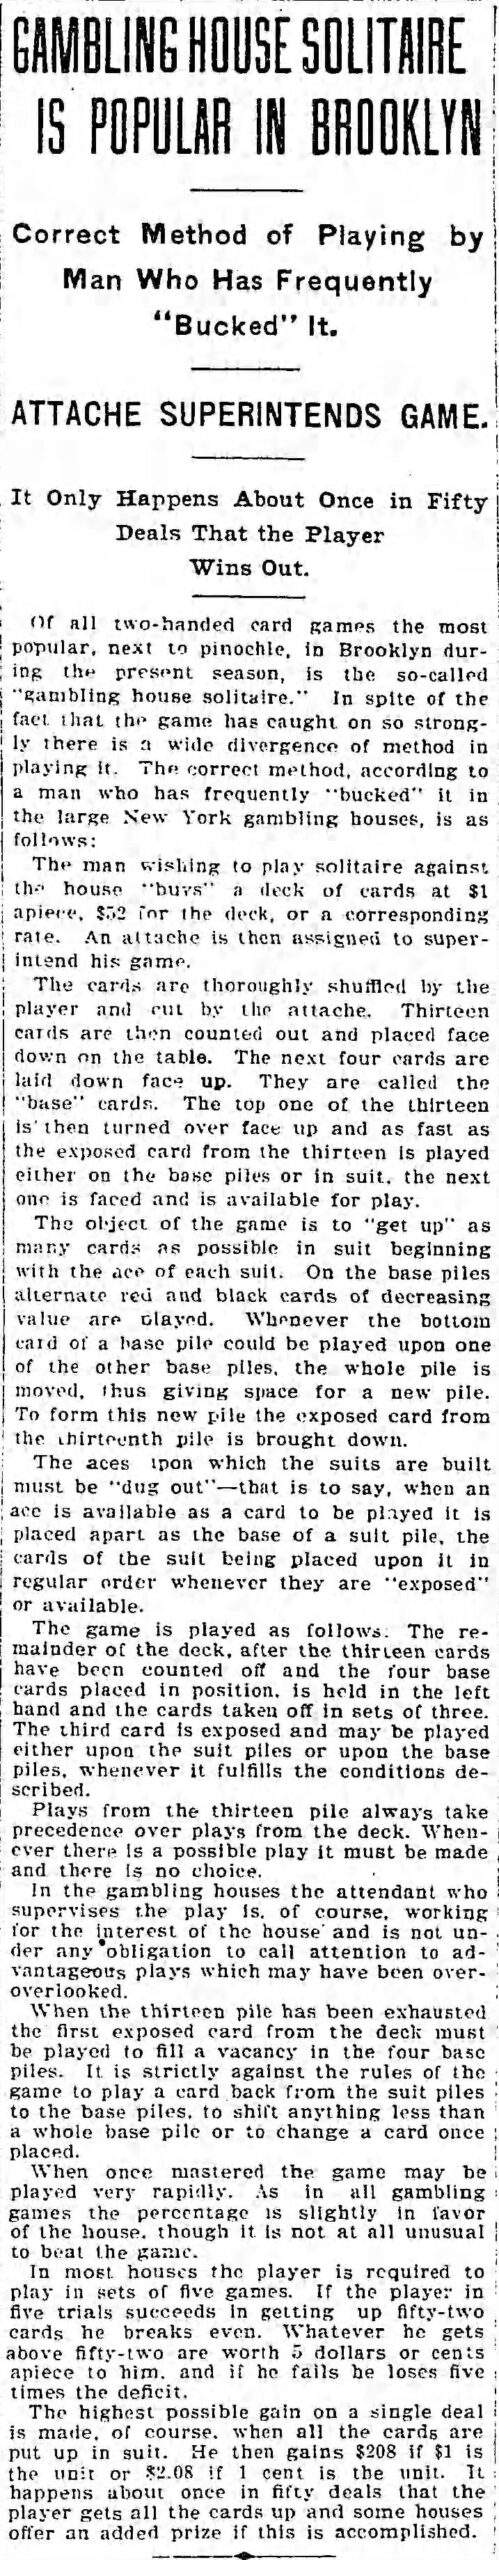 Gambling House Solitaire is popular in Brooklyn - The Brooklyn Daily Eagle - 1902 article about solitaire